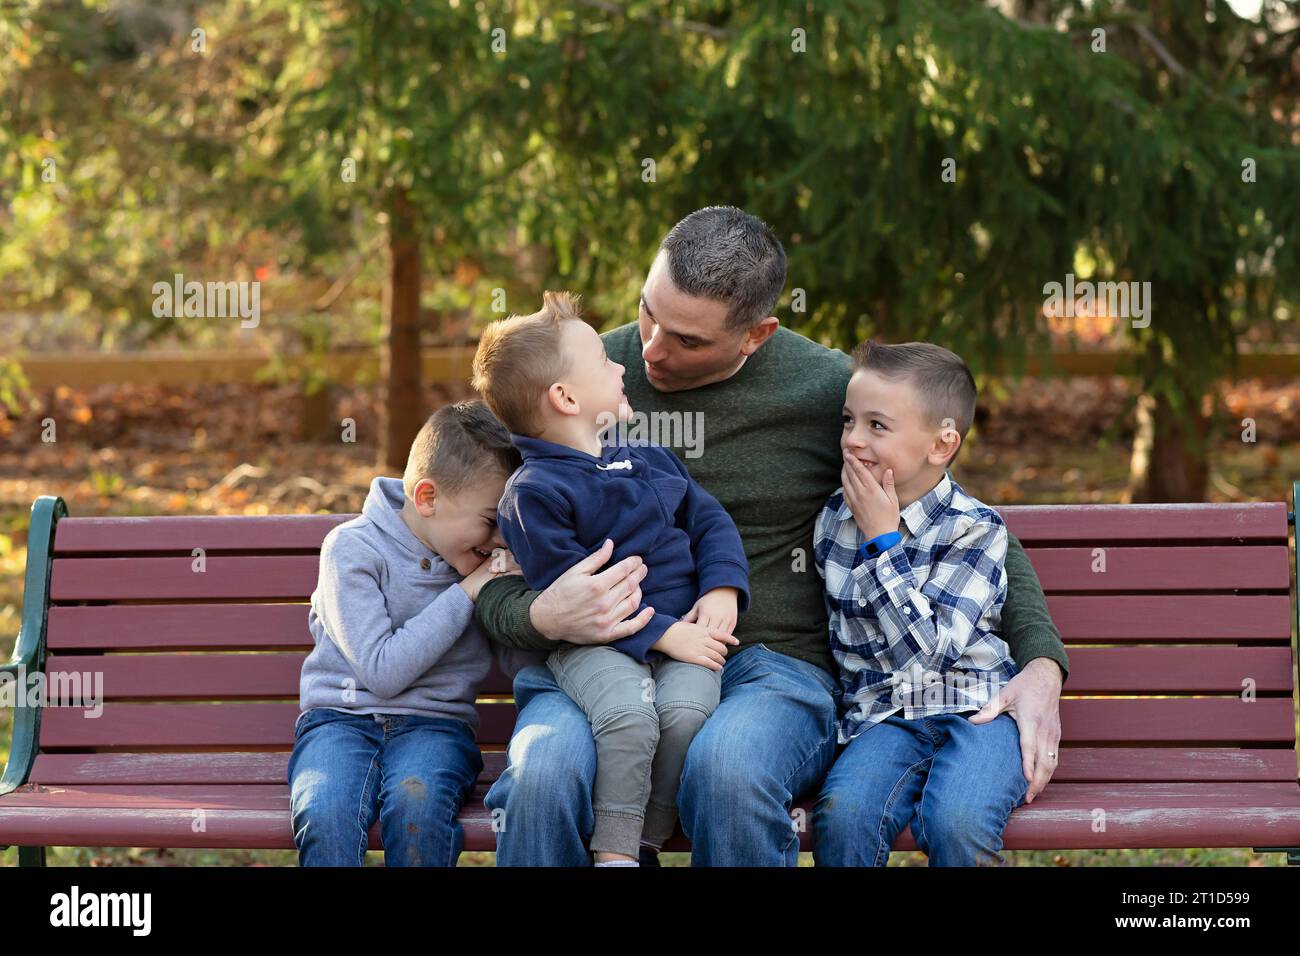 Father on a bench, engaged in a heartwarming interaction with his sons Stock Photo